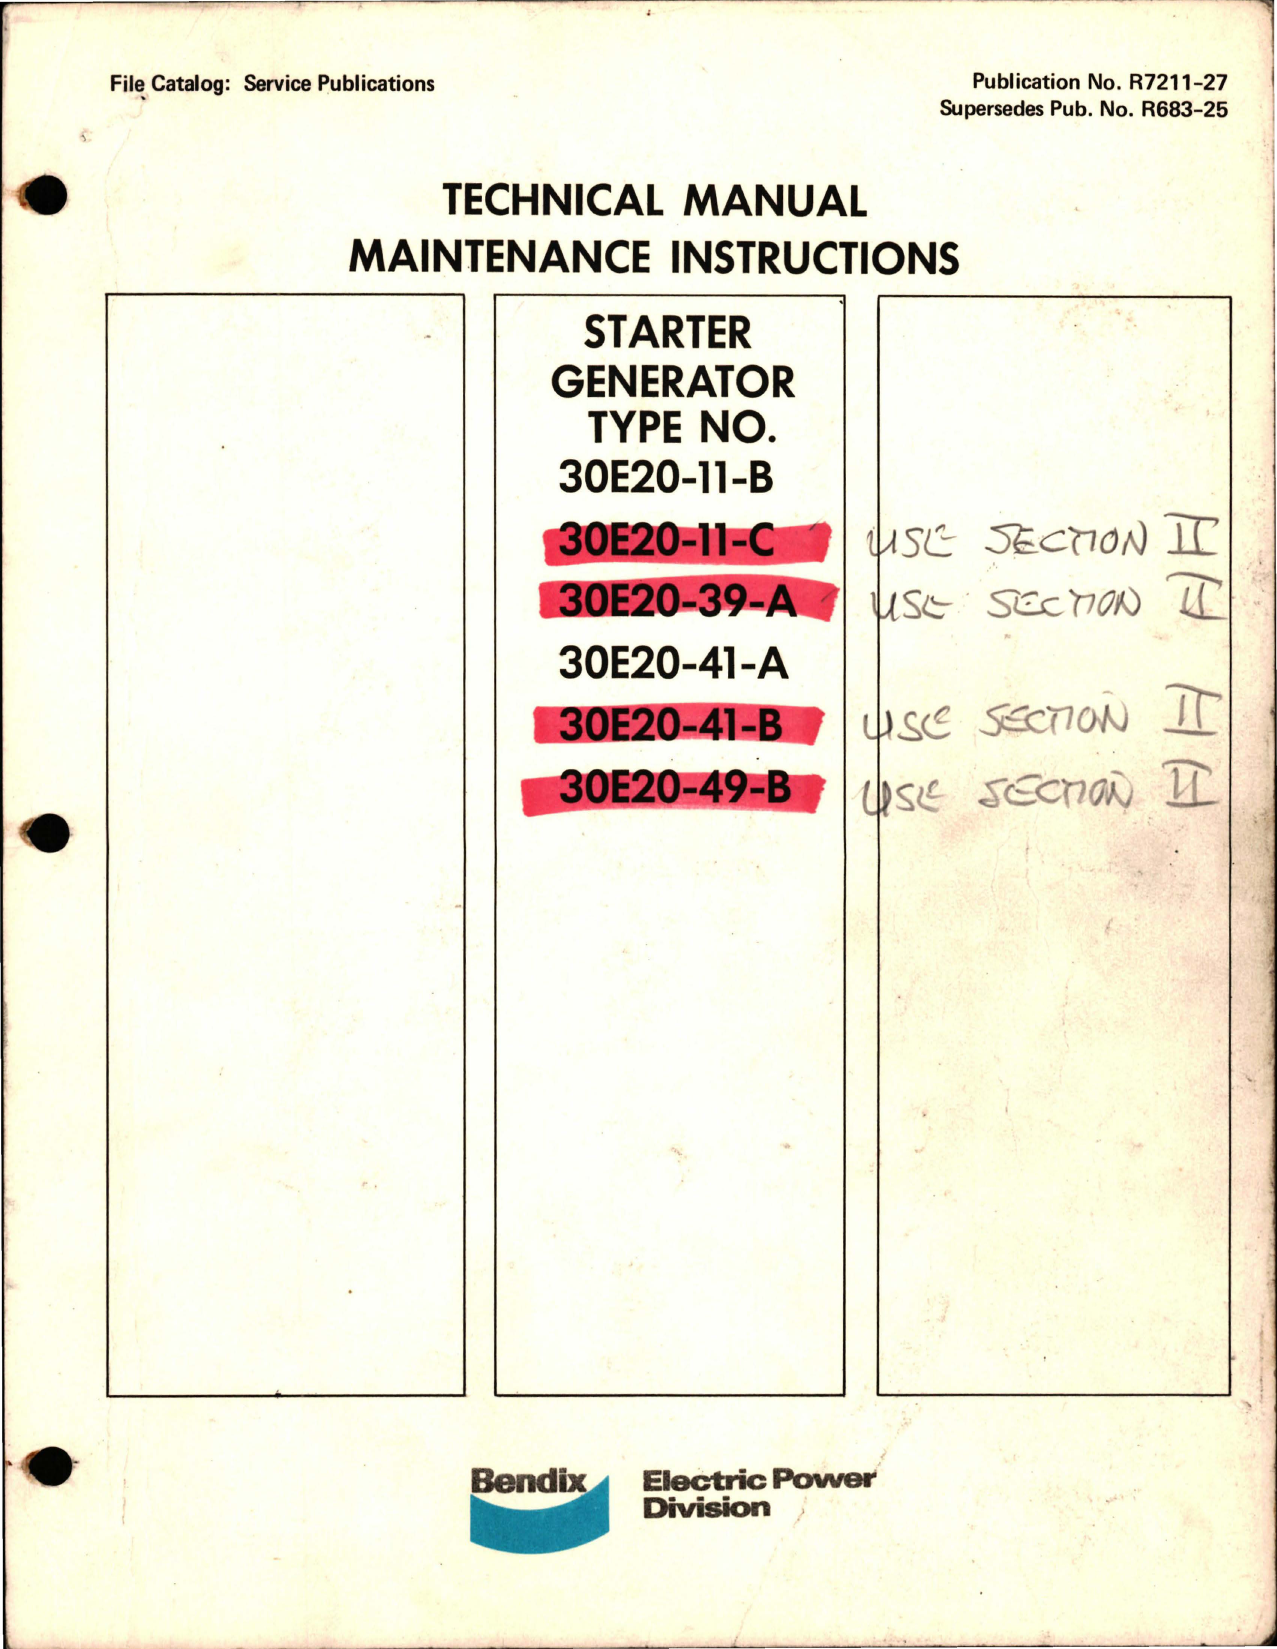 Sample page 1 from AirCorps Library document: Maintenance Instructions for Starter Generator - Type 30E20-11-B 